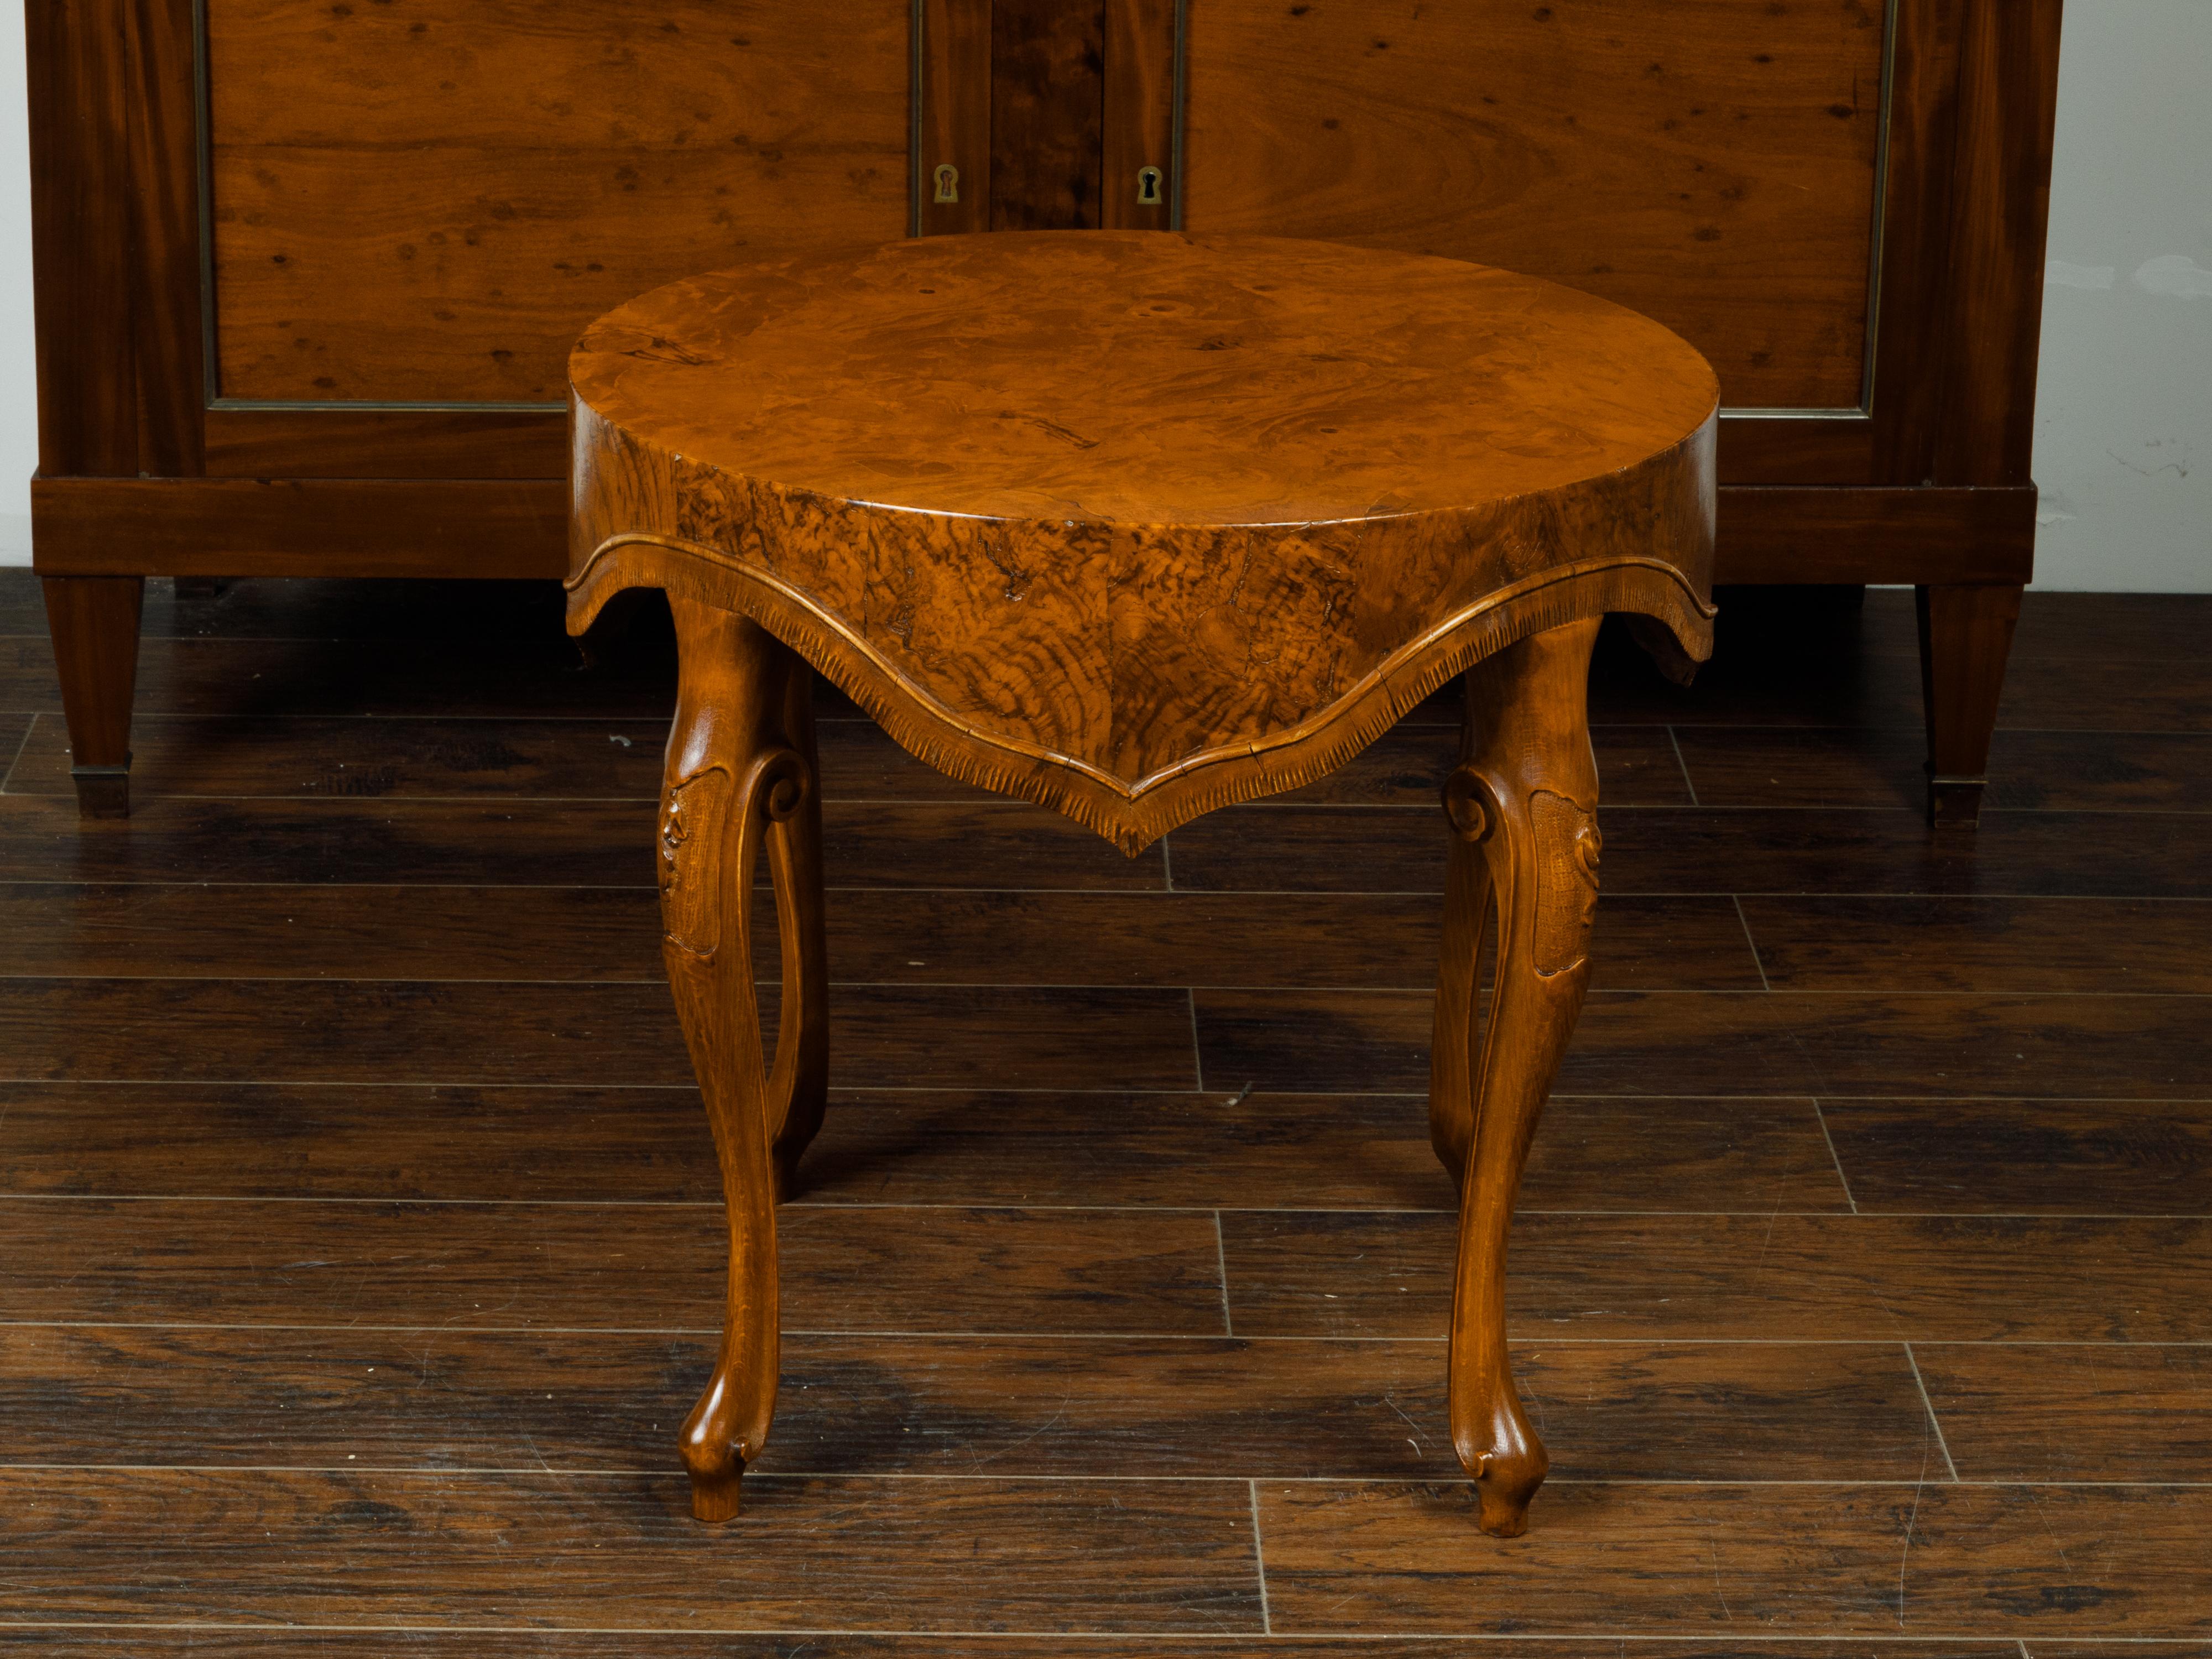 An Italian walnut side table from the mid 20th century, with round top, unusual carved apron and cabriole legs. Created in Italy during the midcentury period, this burl walnut side table features a circular top sitting above a handsome apron